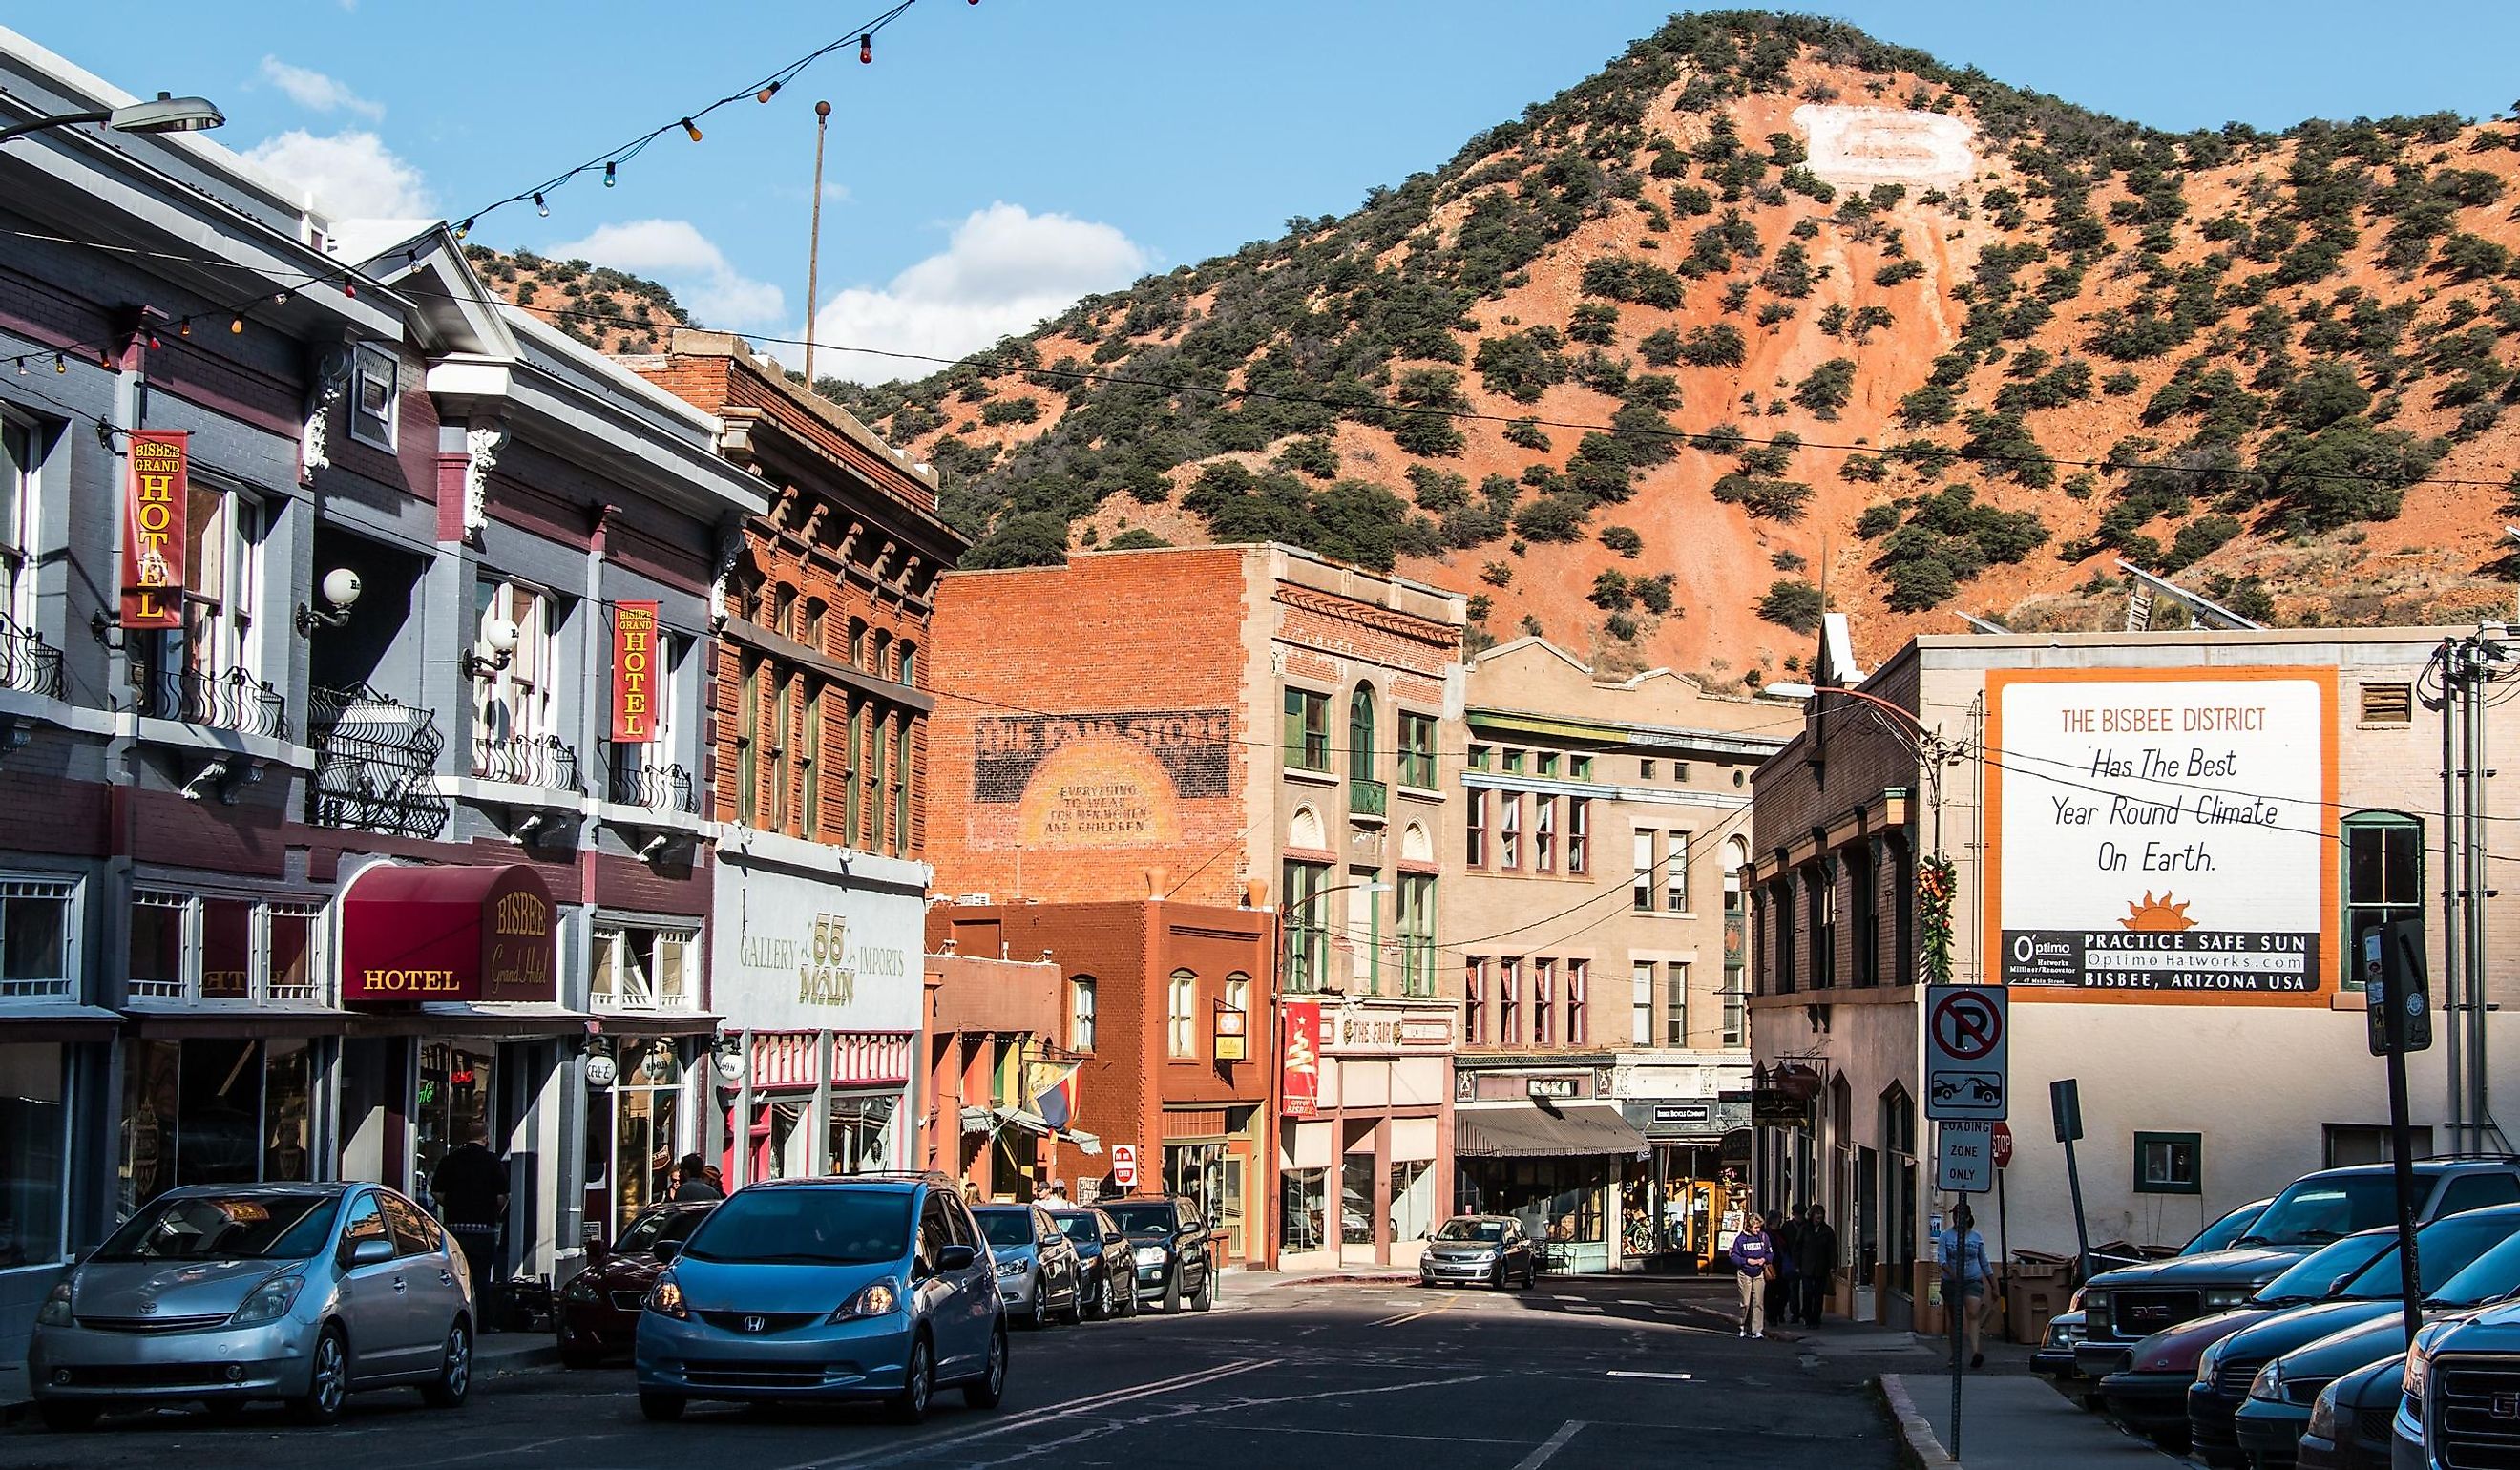 Downtown Bisbee, Arizona and the large "B" on the hillside behind it. Editorial credit: Atomazul / Shutterstock.com